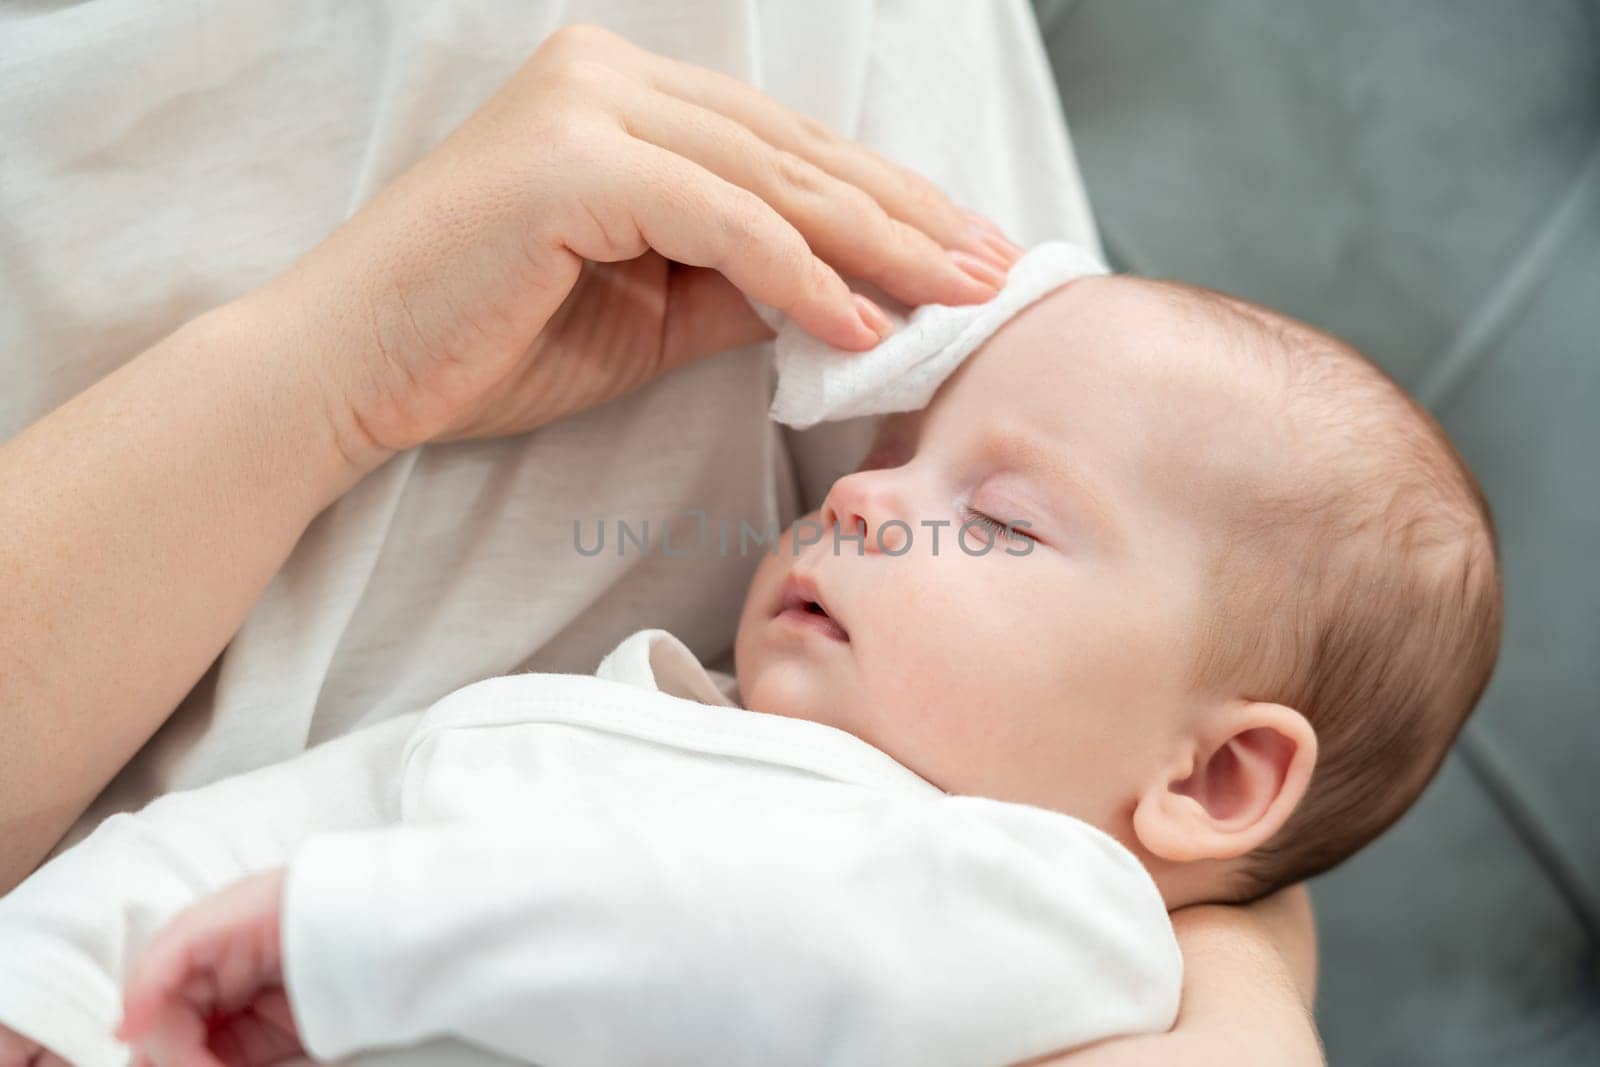 Holding her unwell baby, a mother tenderly touches the newborn's forehead using a wet wipe